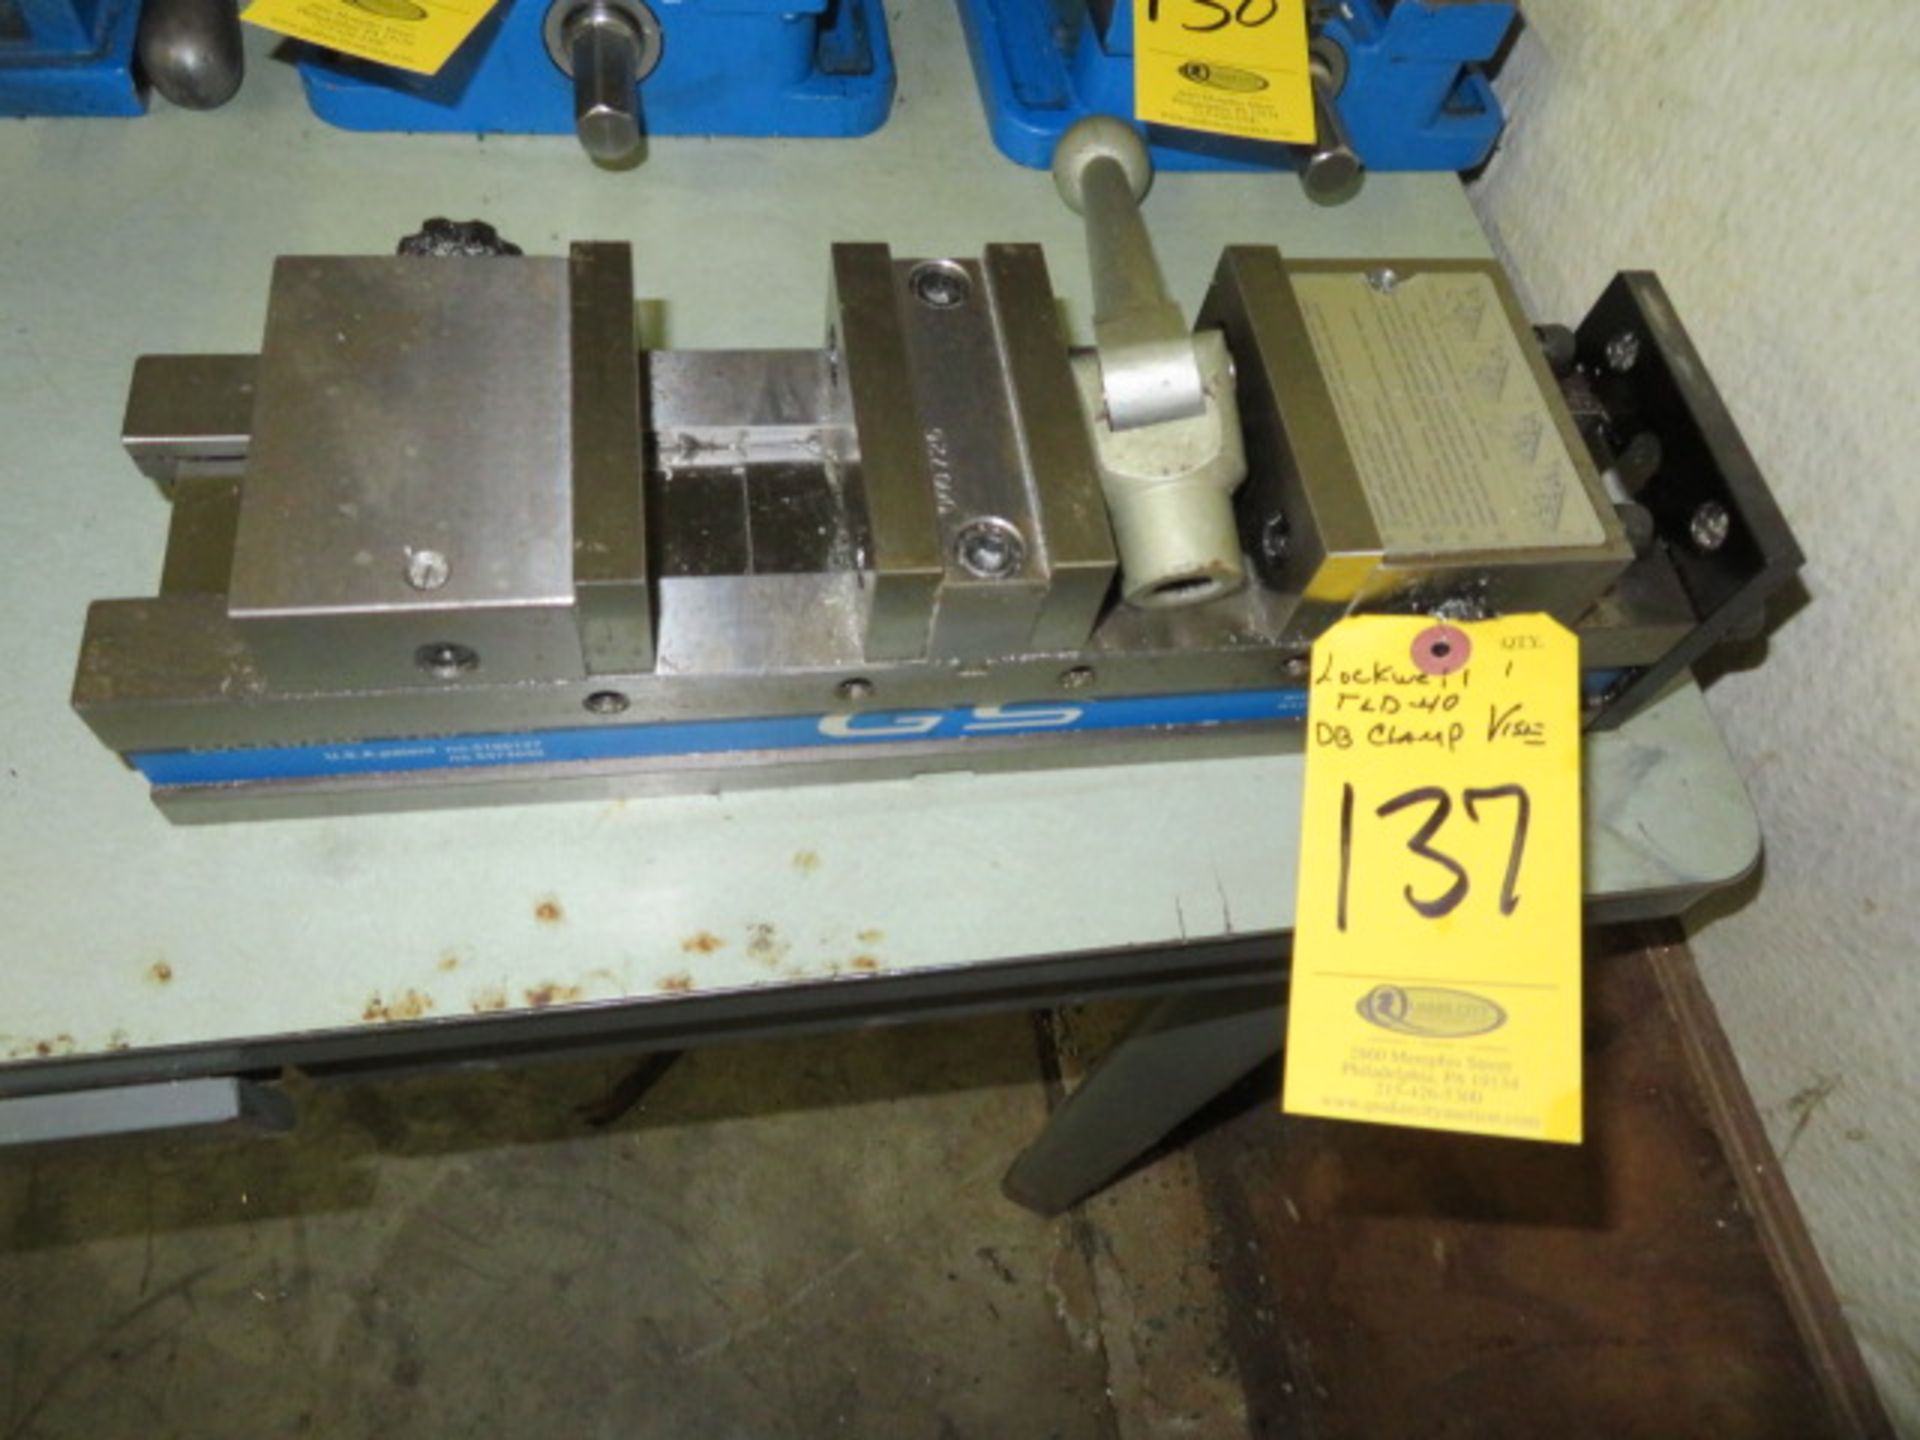 LOCK-WELL TLD-40 DBL CLAMP VISE